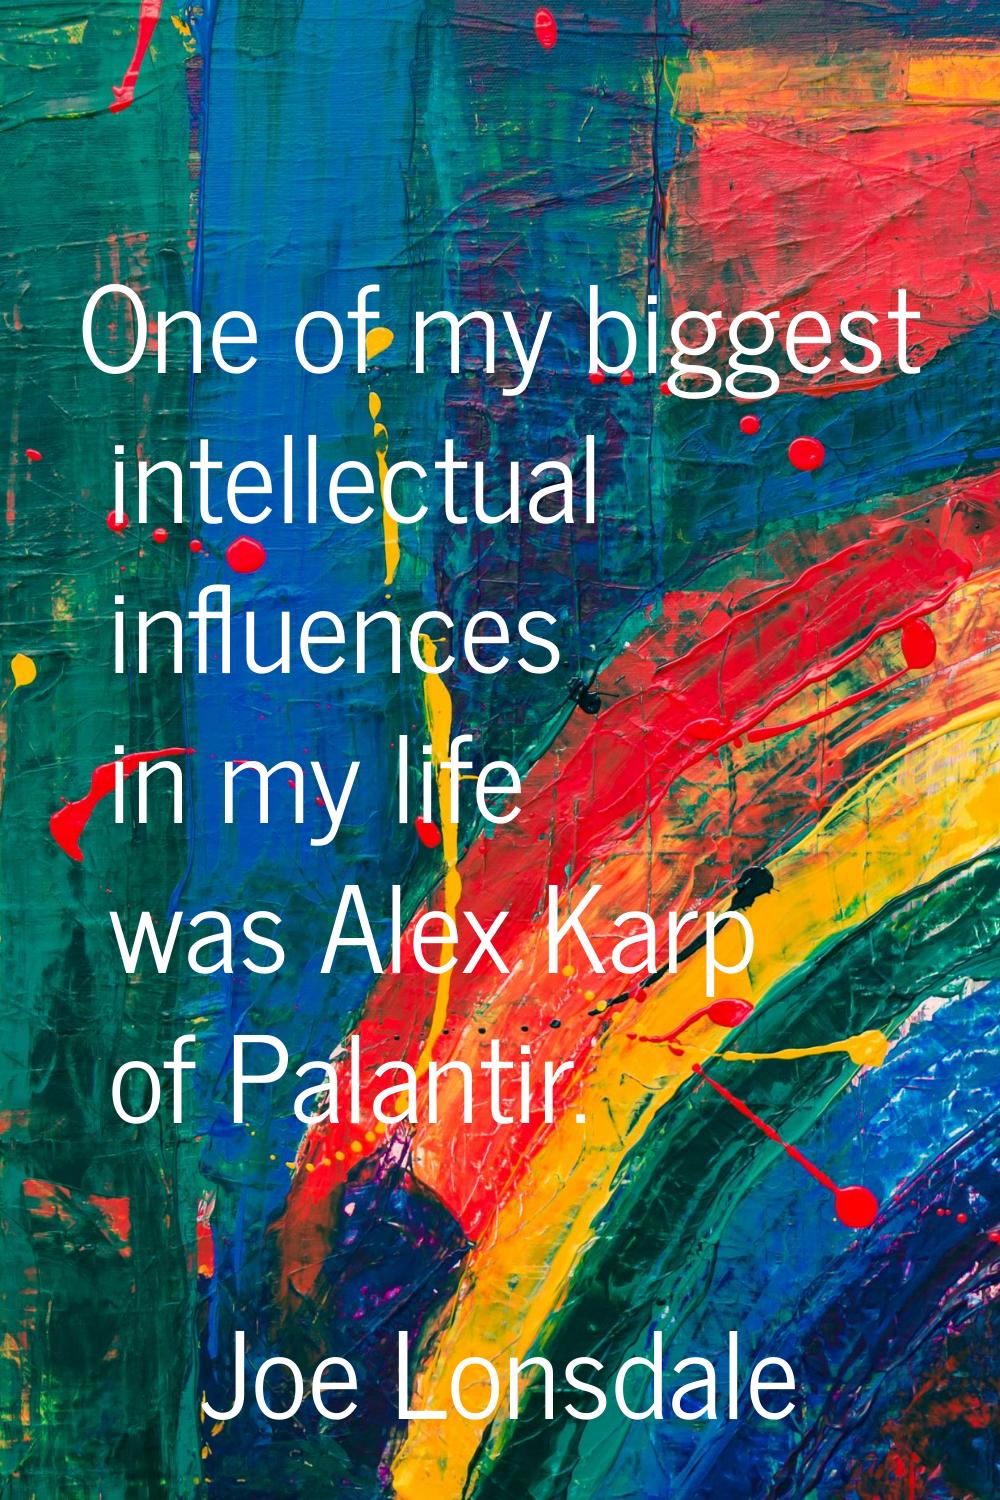 One of my biggest intellectual influences in my life was Alex Karp of Palantir.